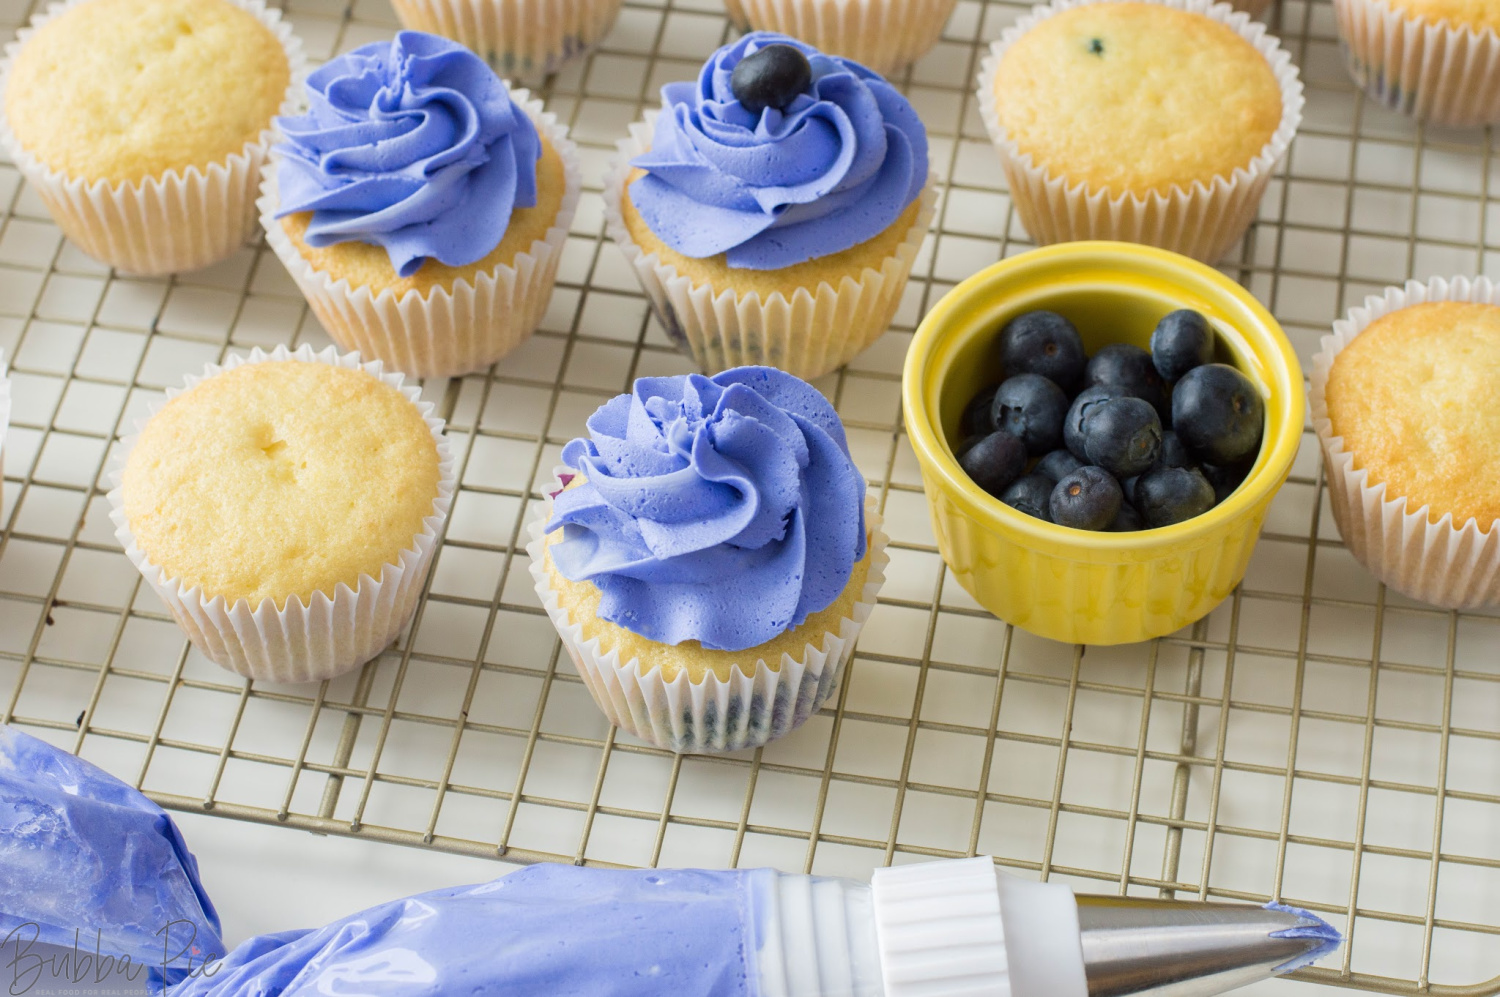 Lemon Blueberry Cupcakes getting topped with buttercream frosting